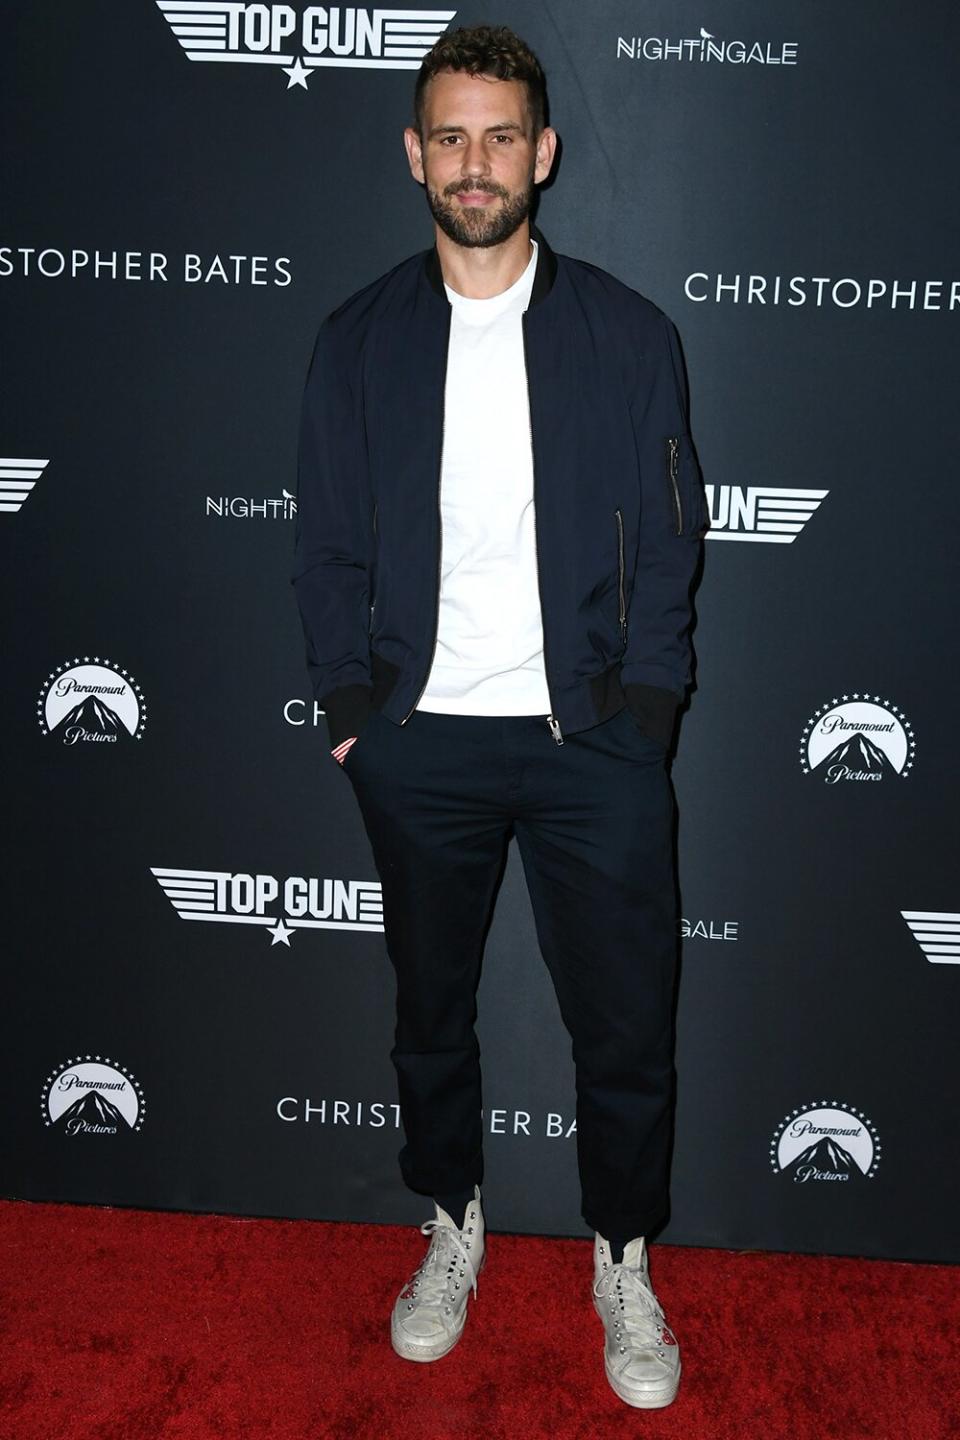 Nick Viall attends Top Gun x Christopher Bates collection launch event at Nightingale Plaza on June 18, 2022 in Los Angeles, California.